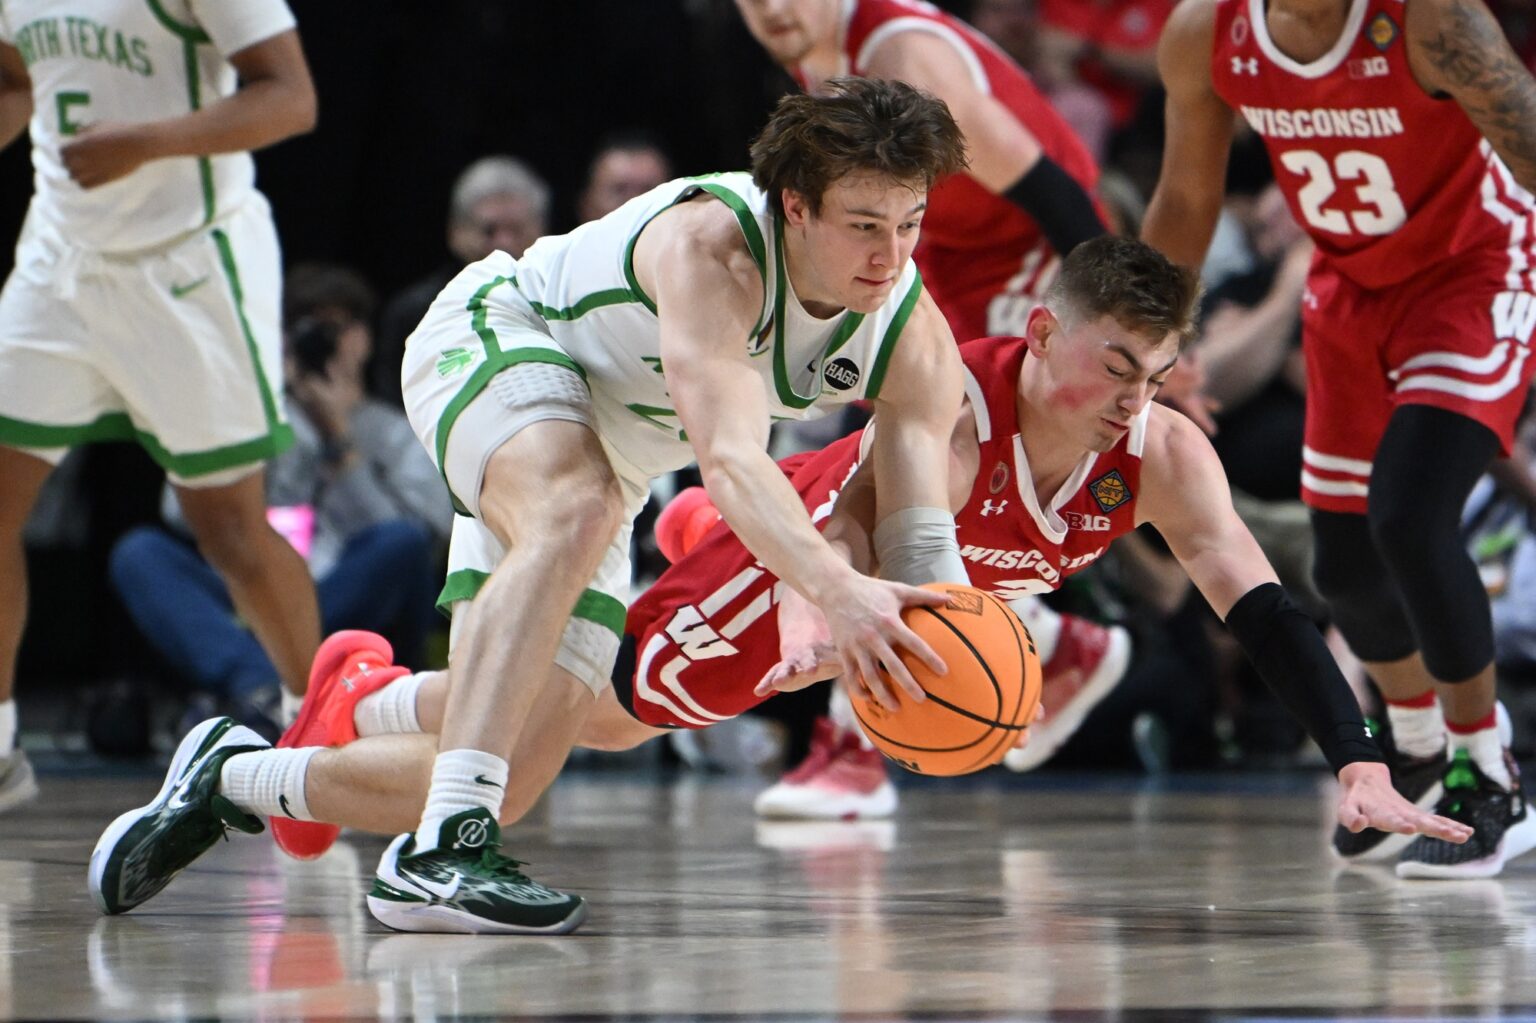 Wisconsin Badgers guard Connor Essegian dives for a loose ball.